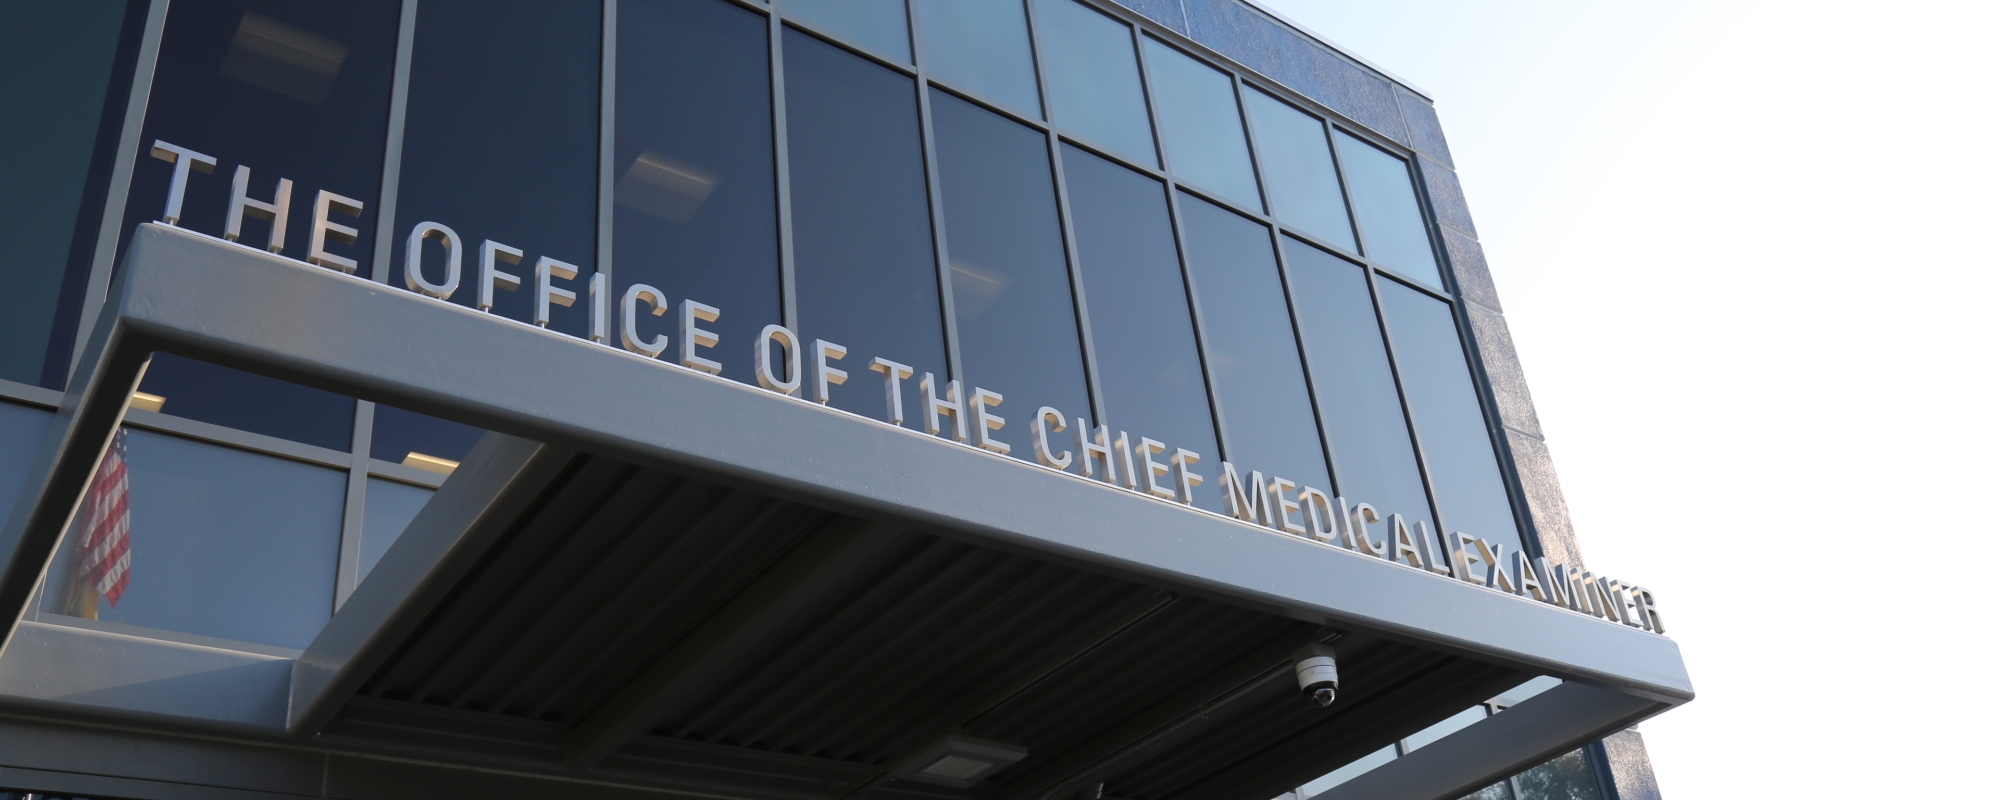 The new Office of the Chief Medical Examiner features state-of-the-art forensic examination stations and more.